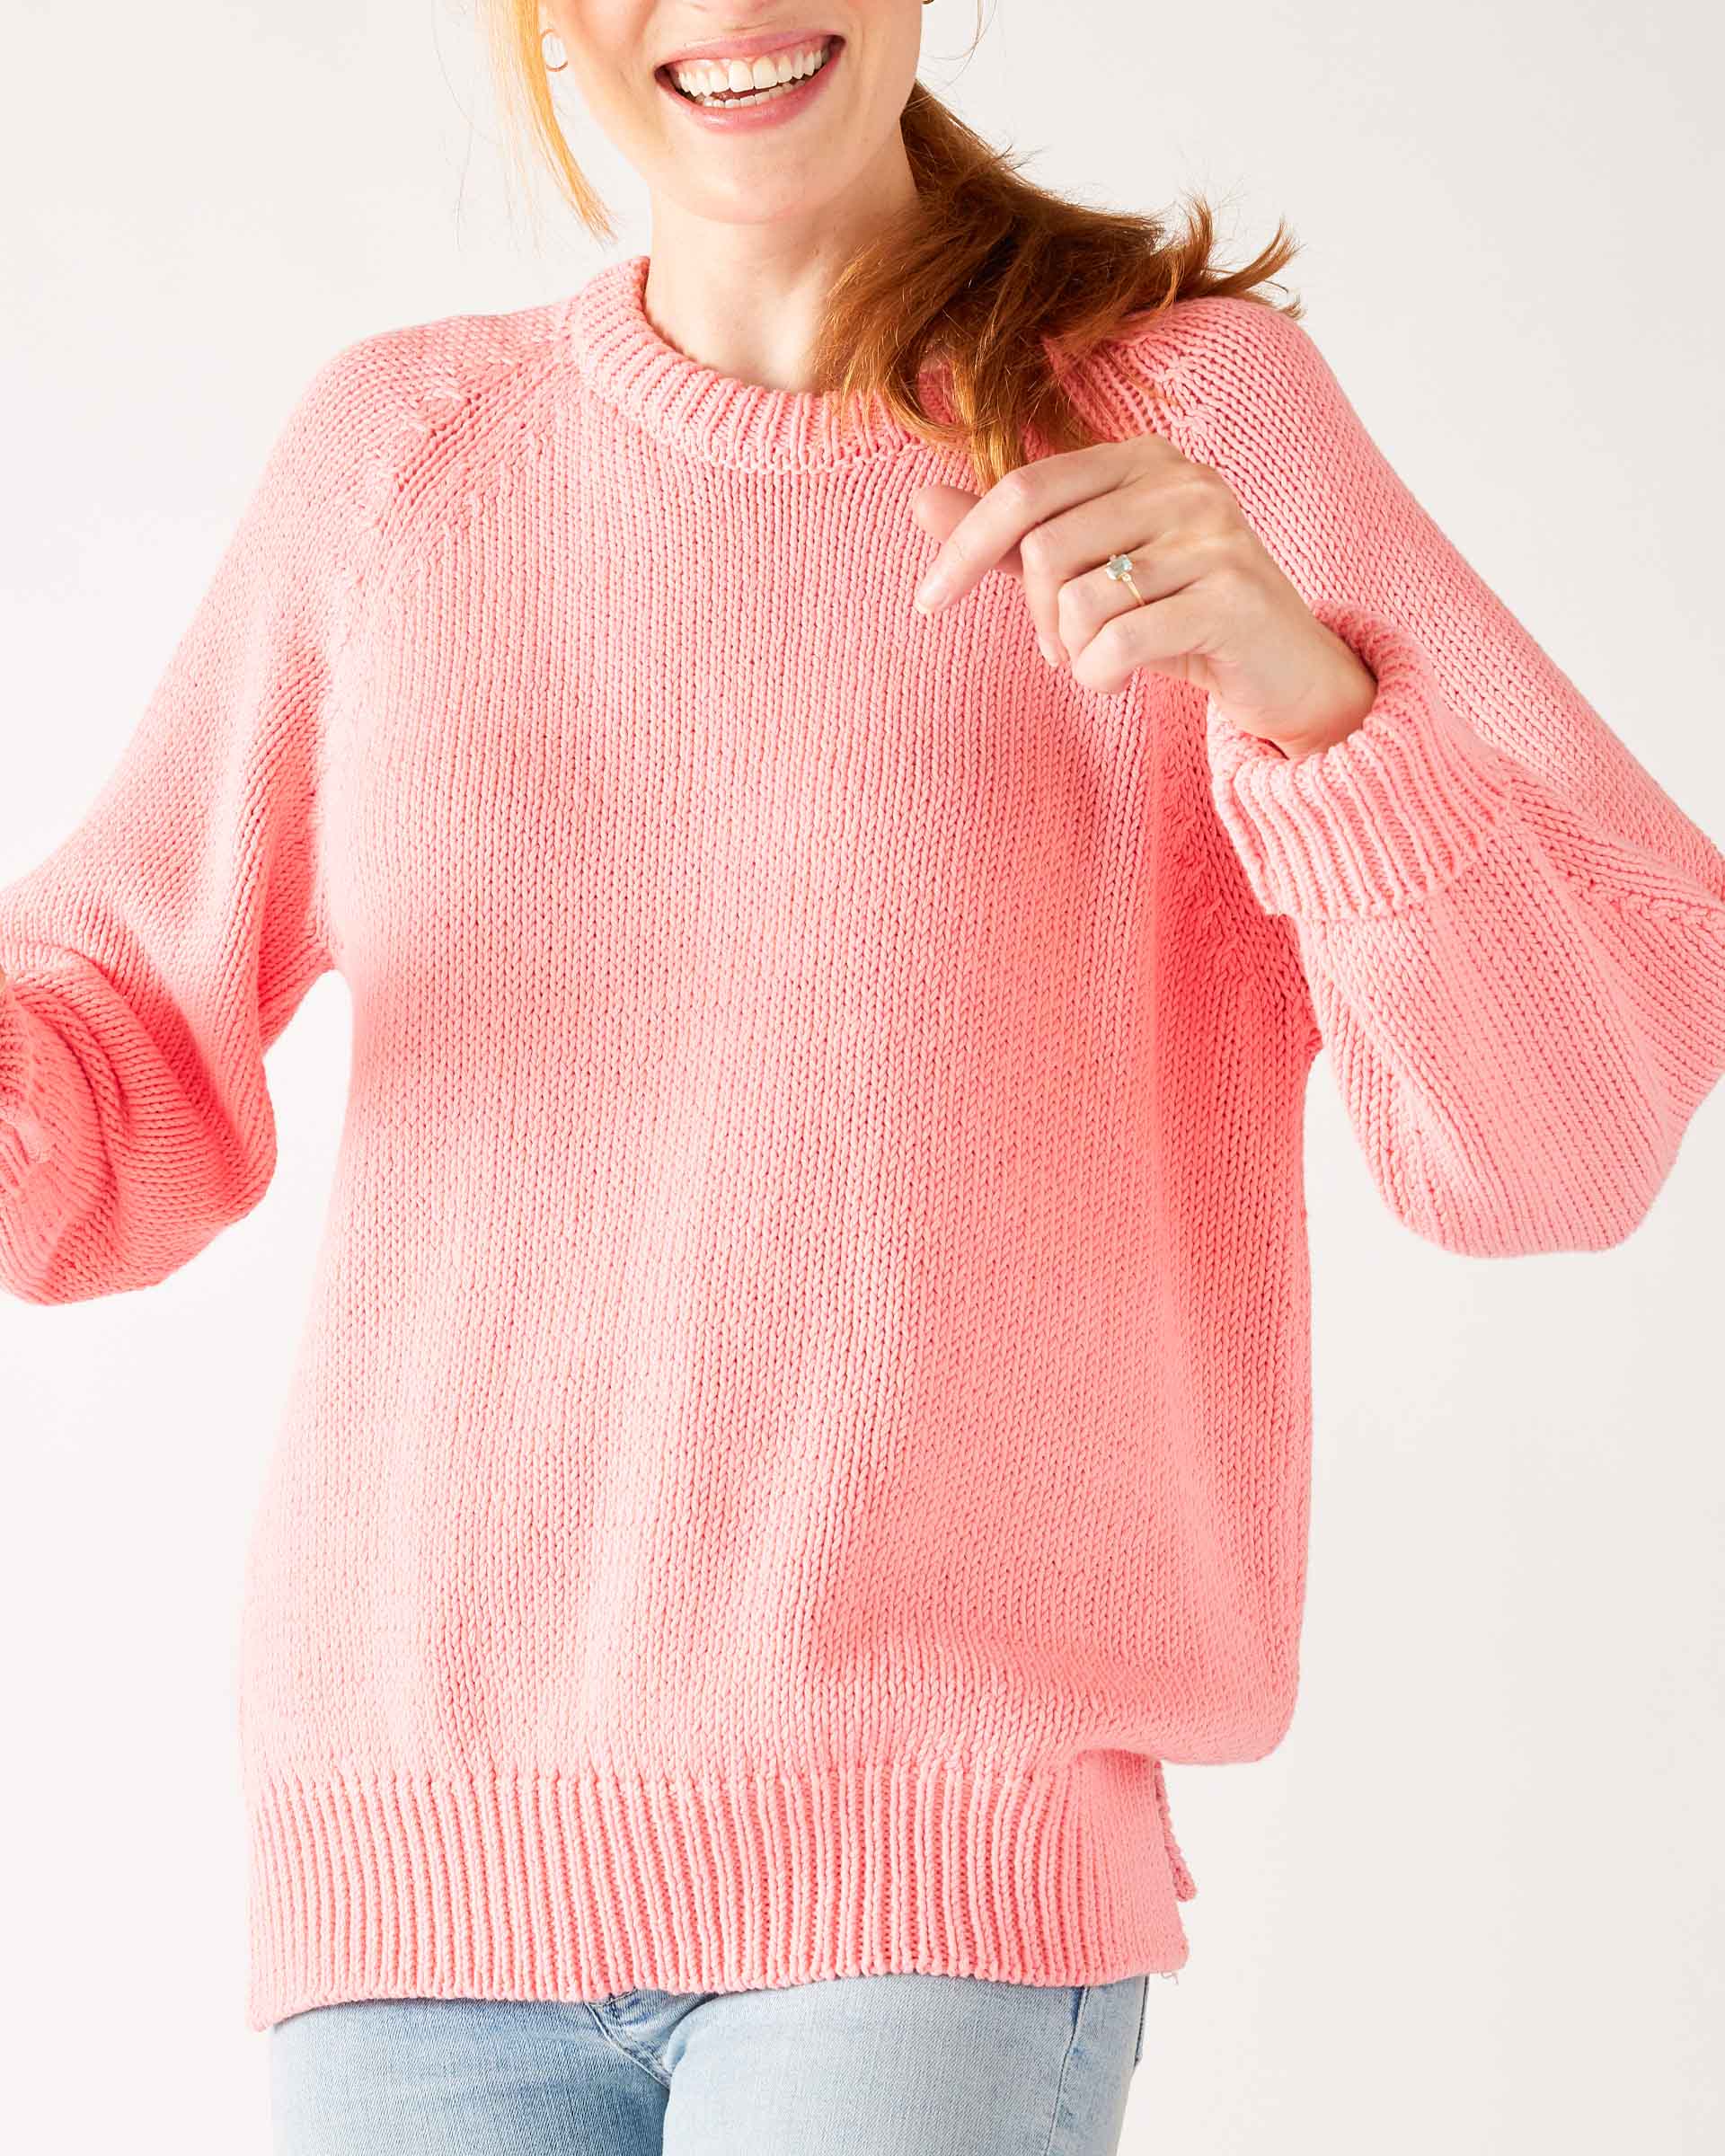 Women's Light Pink Soft Crewneck Stitched Sweater Front View